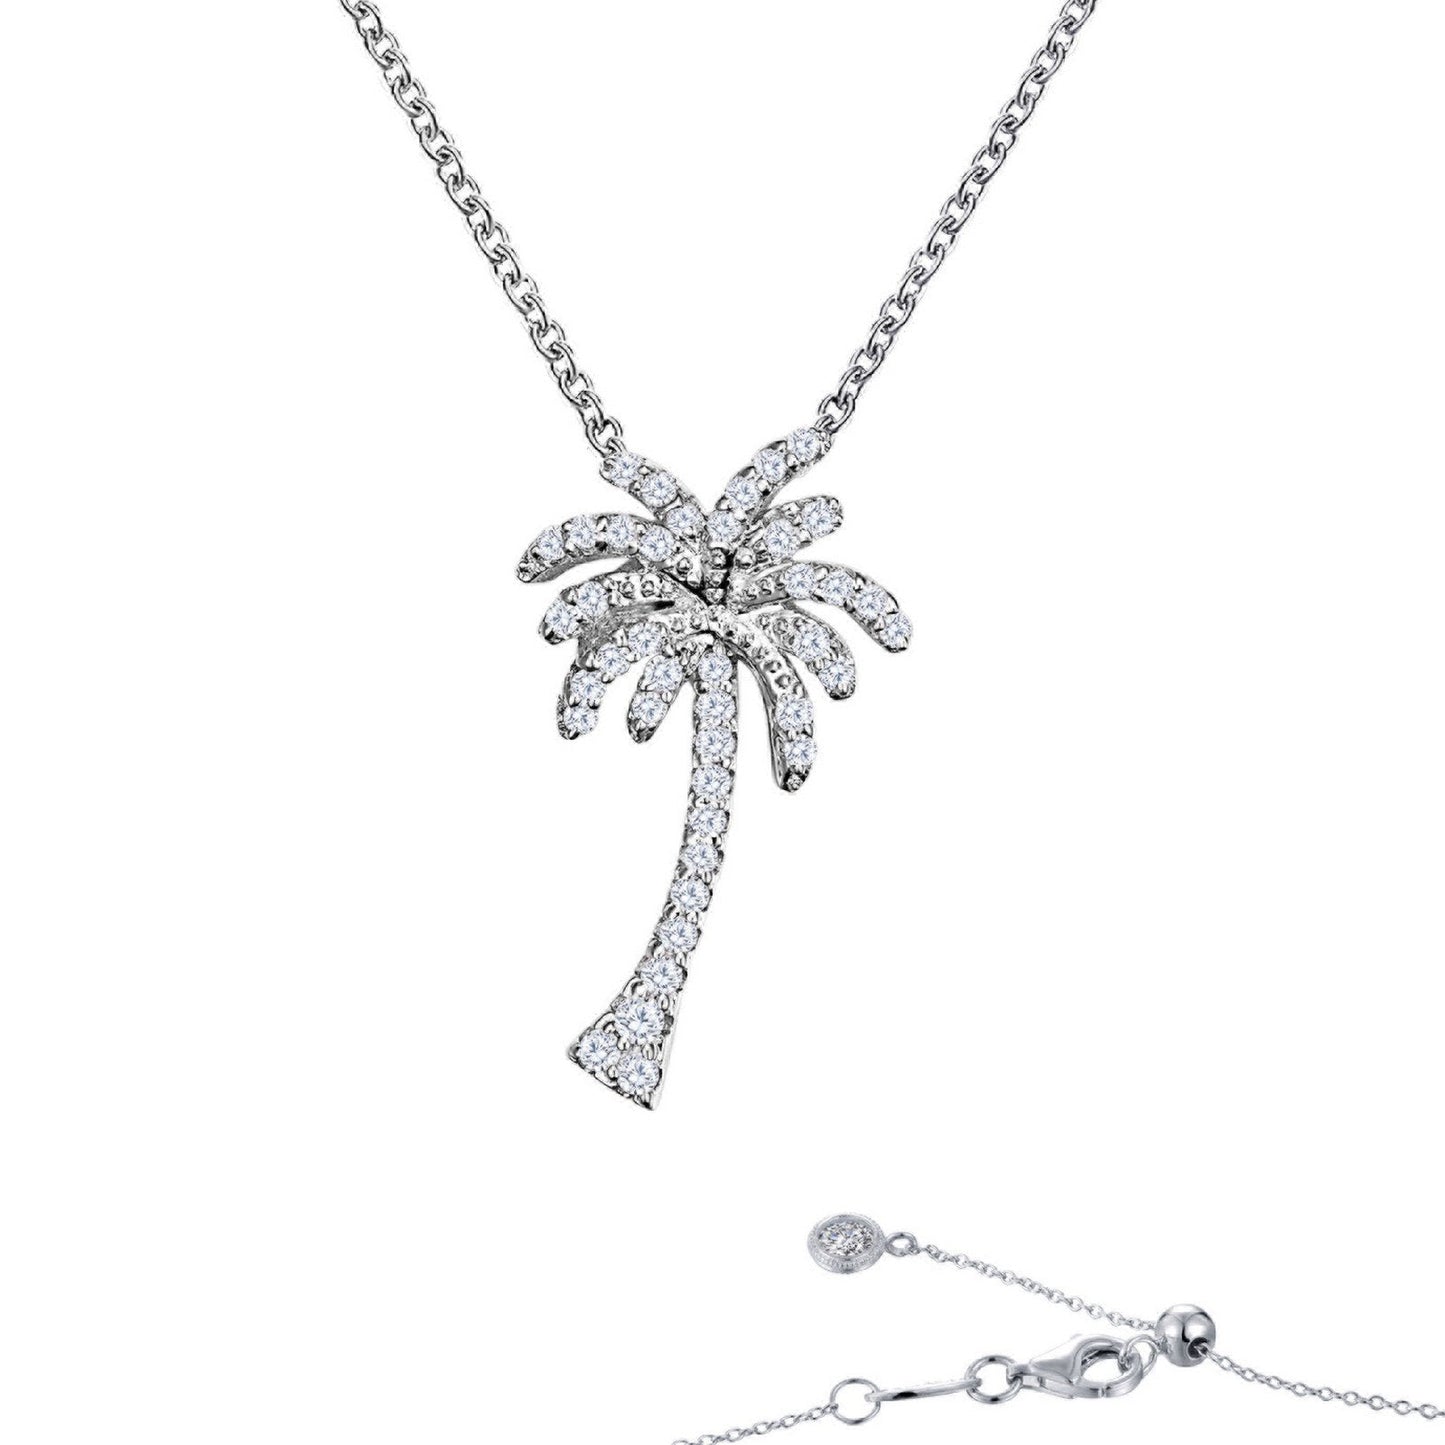 Lafonn Tropical Palm Tree Necklace Simulated Diamond NECKLACES Platinum 0.66 CTS Approx. 18mm (H) x 11mm (W)